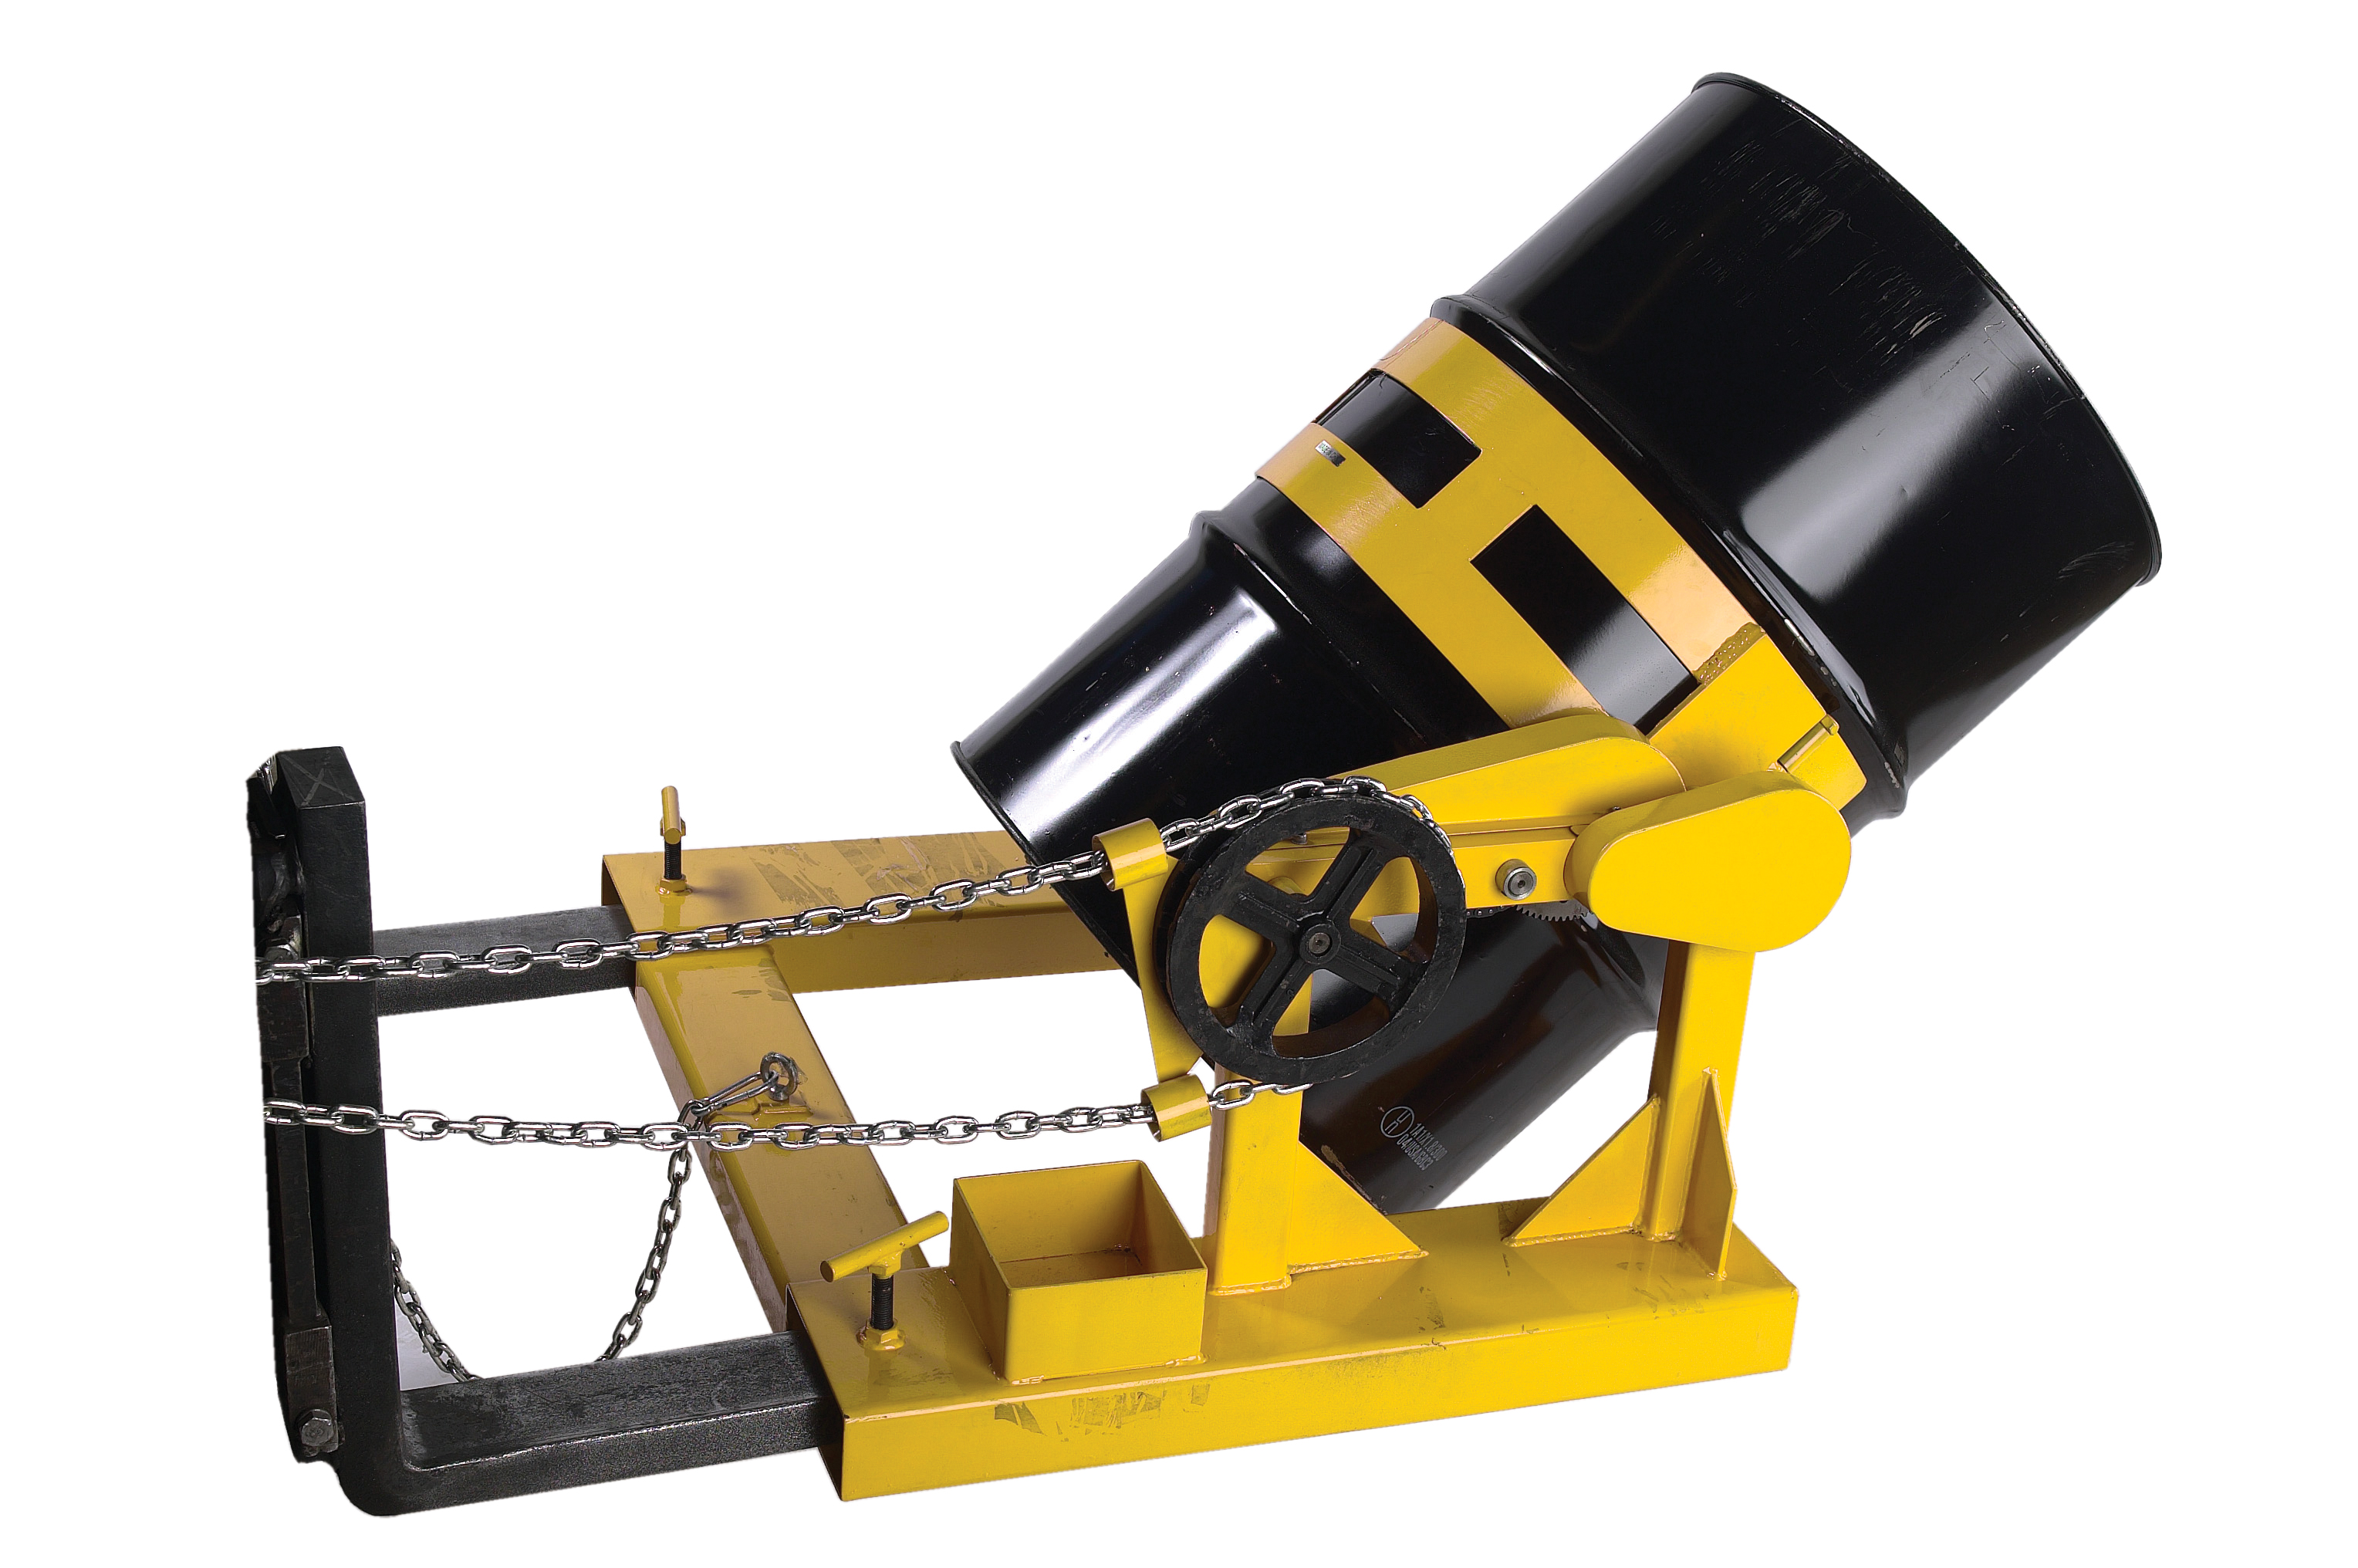 Value Fork Truck Drum Lifter And Tilter, 700 lbs. Capacity